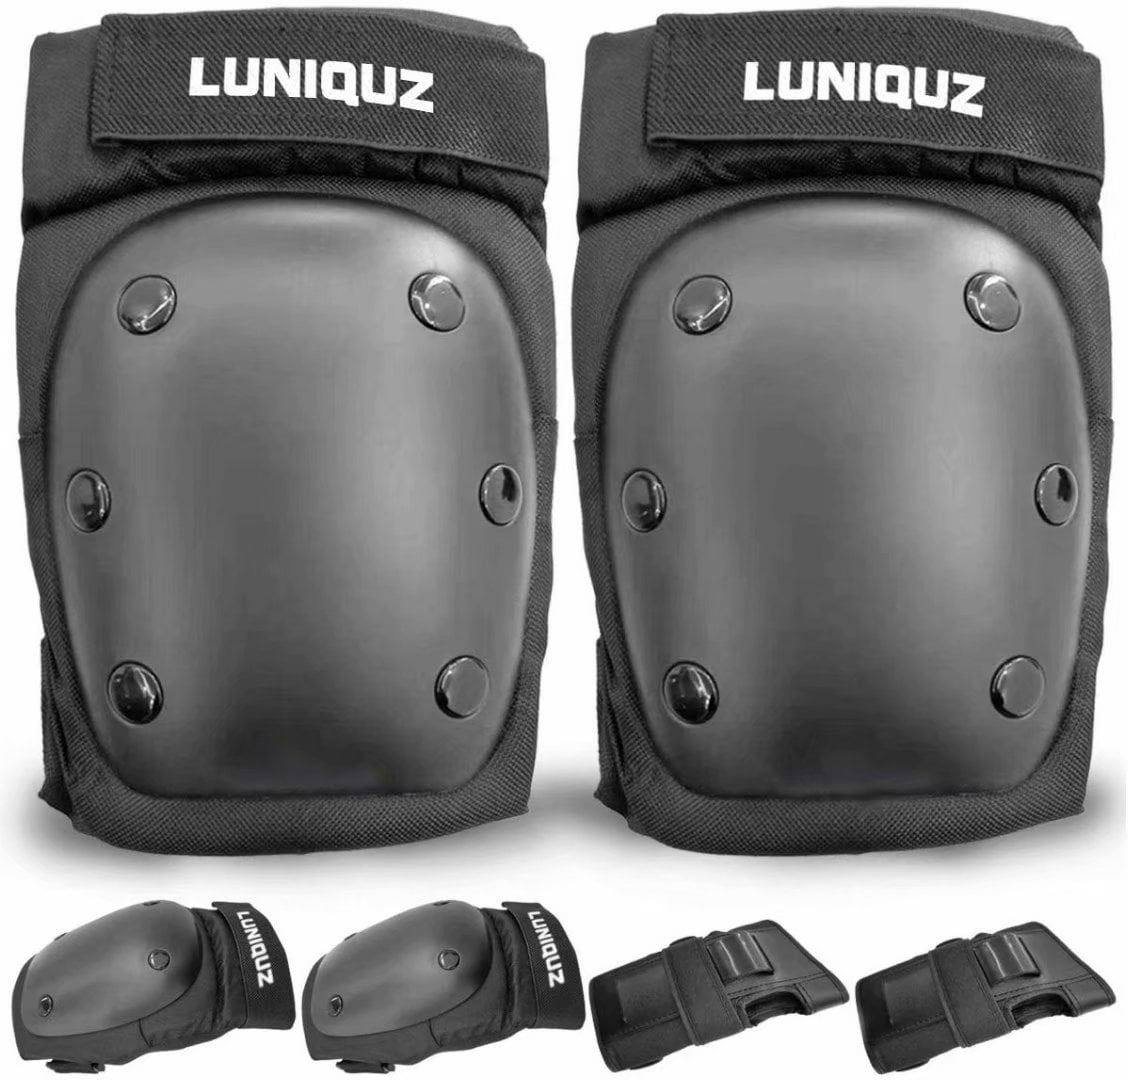 CRZKO Skateboard Pads for Adult/Youth 6 in 1 Elbow and Knee Pads Adult Youth Teens Protective Gear Set with Wrist Guards for Scooter Skateboarding Inline Roller Skating Cycling Bike 